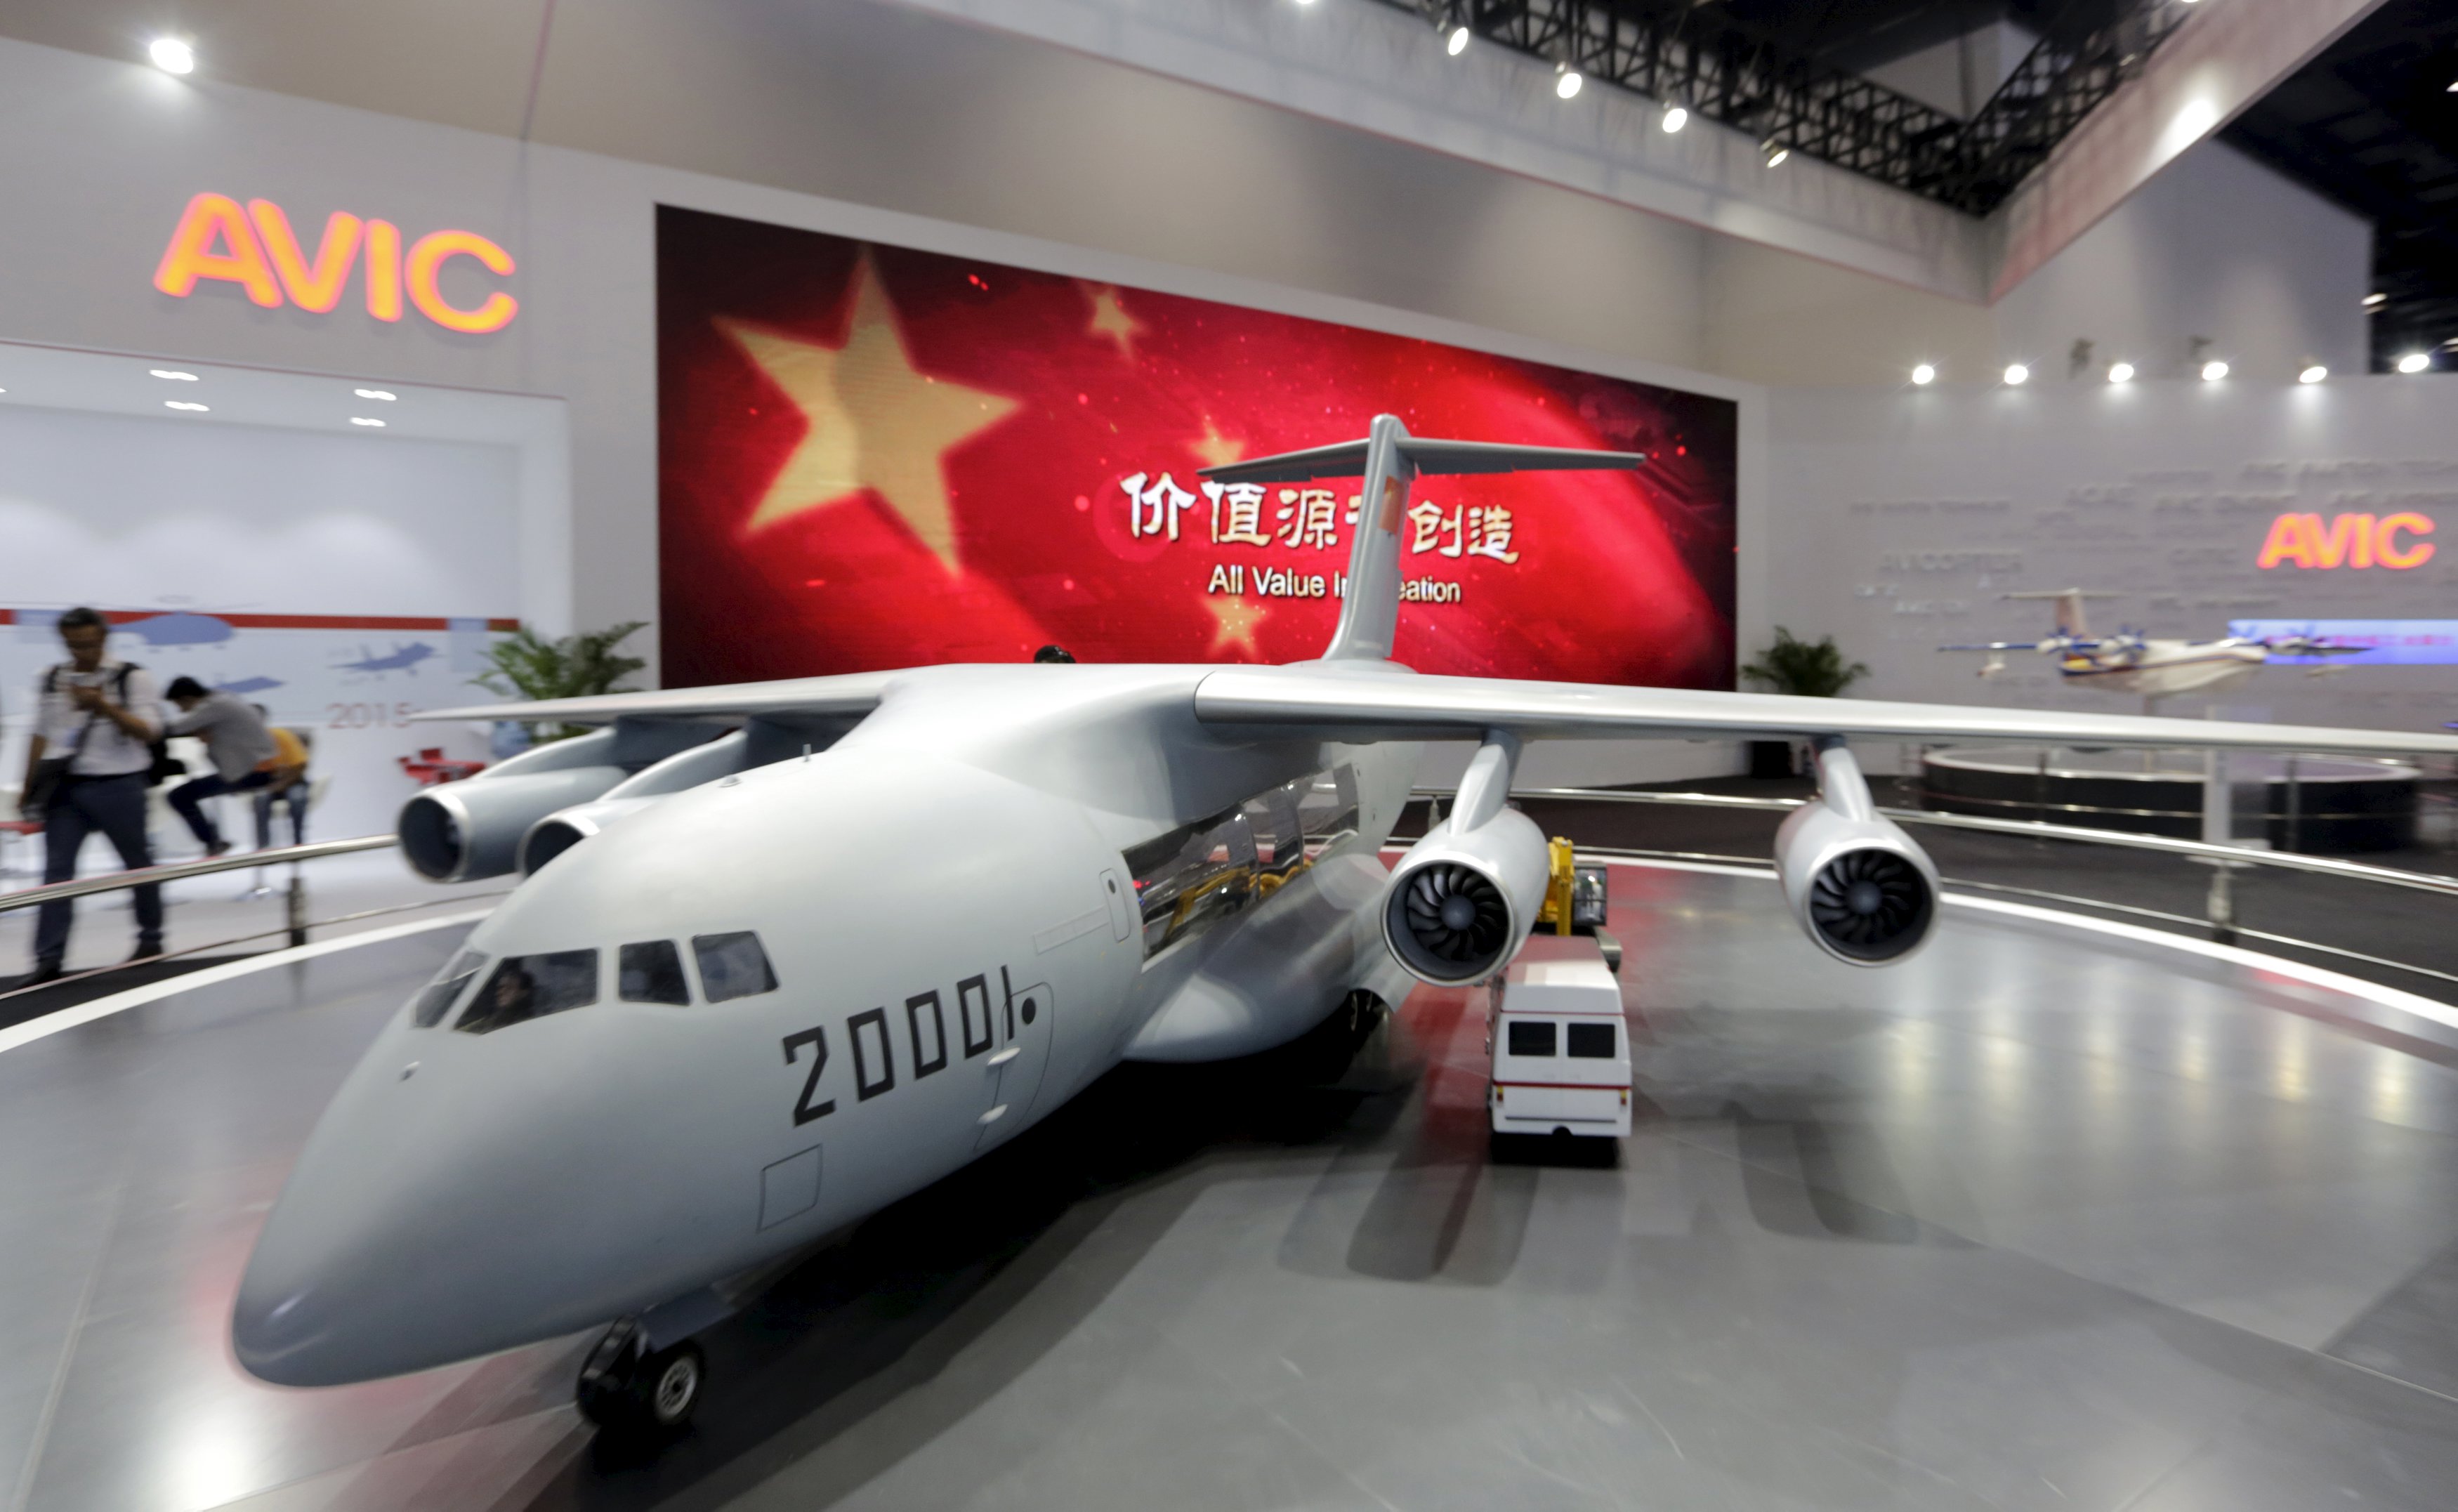 A model of Y-20 military transporter aircraft is displayed at Aviation Industry Corporation of China (AVIC)'s booth at the Aviation Expo China 2015, in Beijing, China, September 16, 2015. The four-day Aviation Expo China 2015 kicked off on Wednesday. According to local media, the expo is jointly organized by Aviation Industry Corporation of China (AVIC), Commercial Aircraft Corporation of China Ltd. (COMAC) and etc. Around 150 exhibitors from 16 countries were invited. REUTERS/Jason Lee